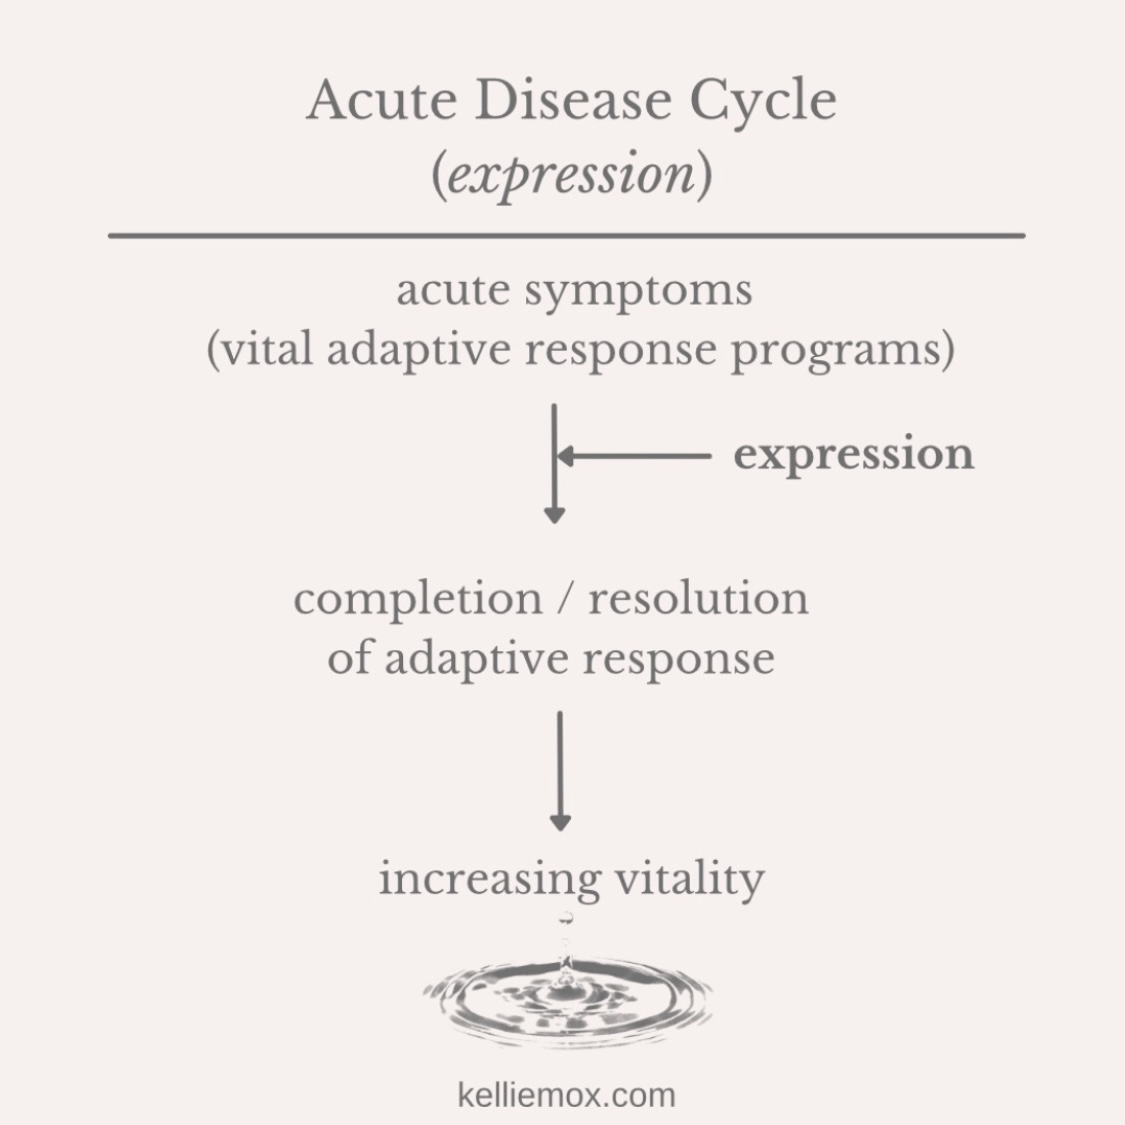 A text about Acute Disease Cycle on expression